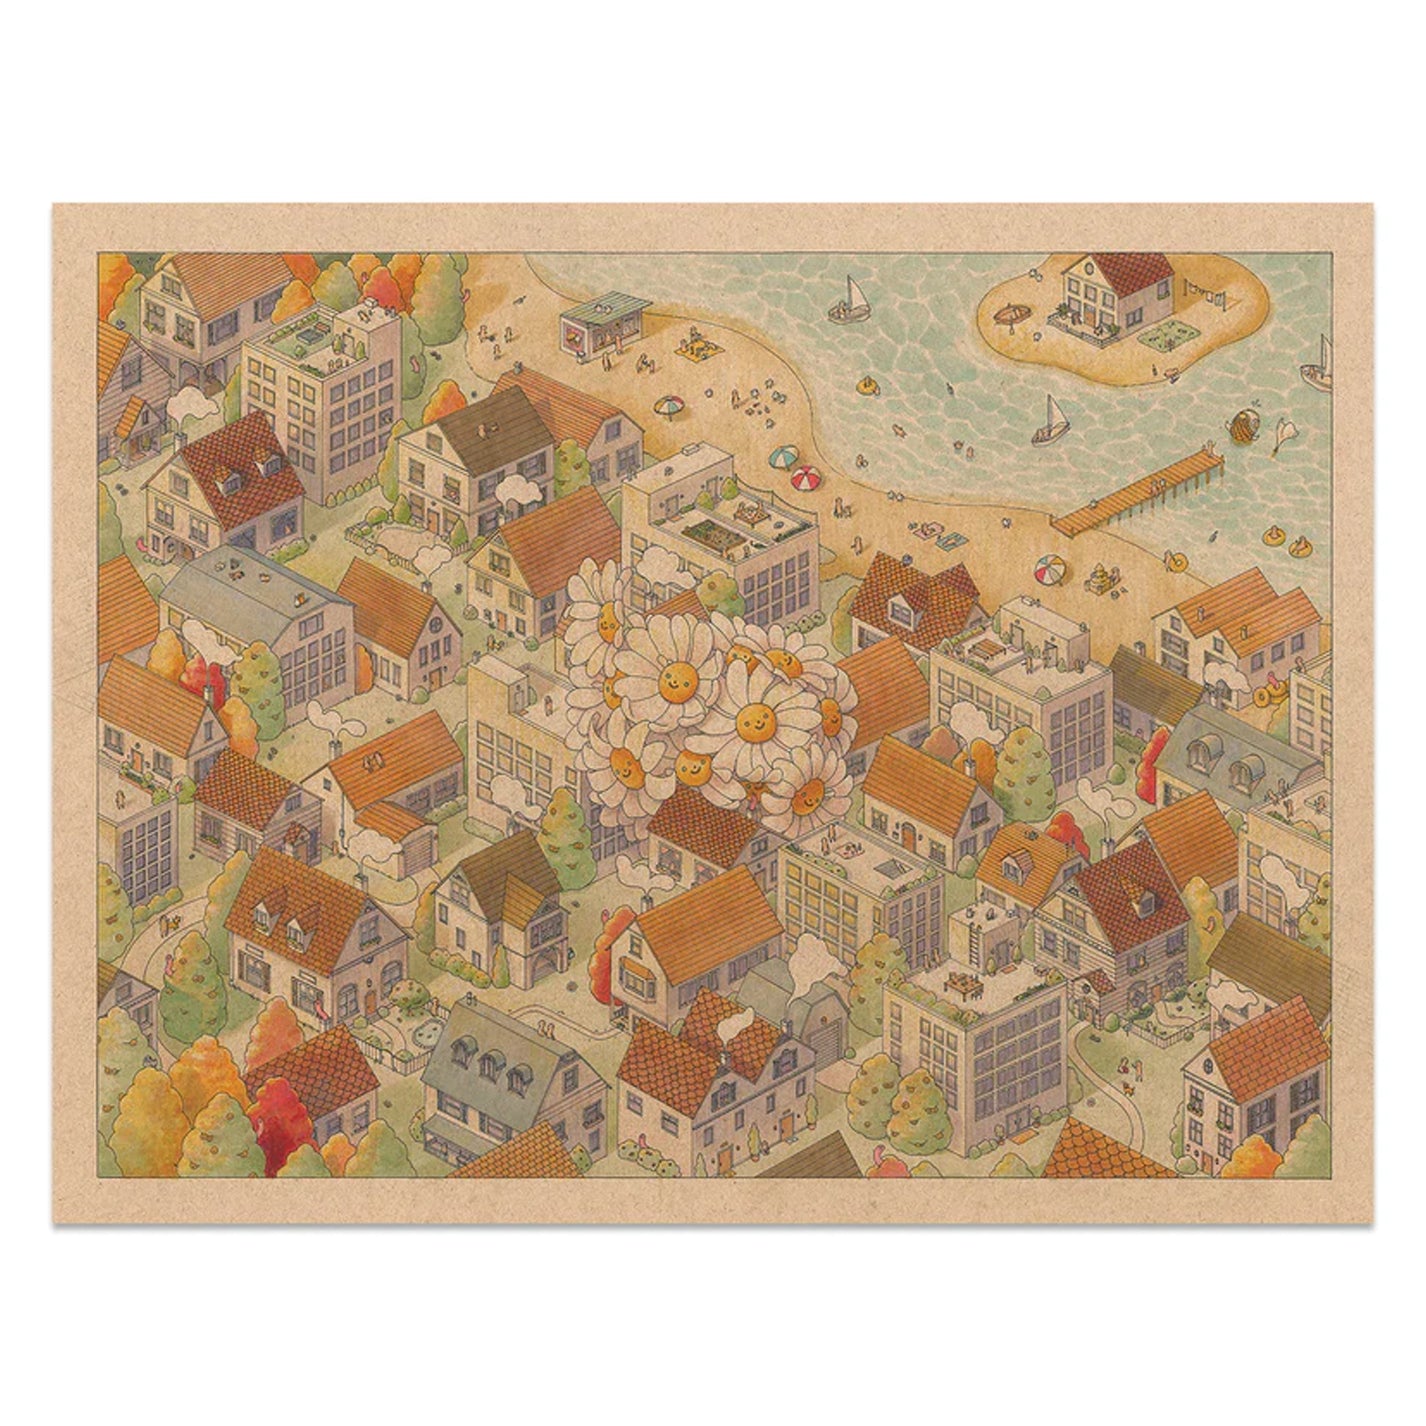  by Felicia Chiao titled Felicia Chiao - "The Sunny City" Print